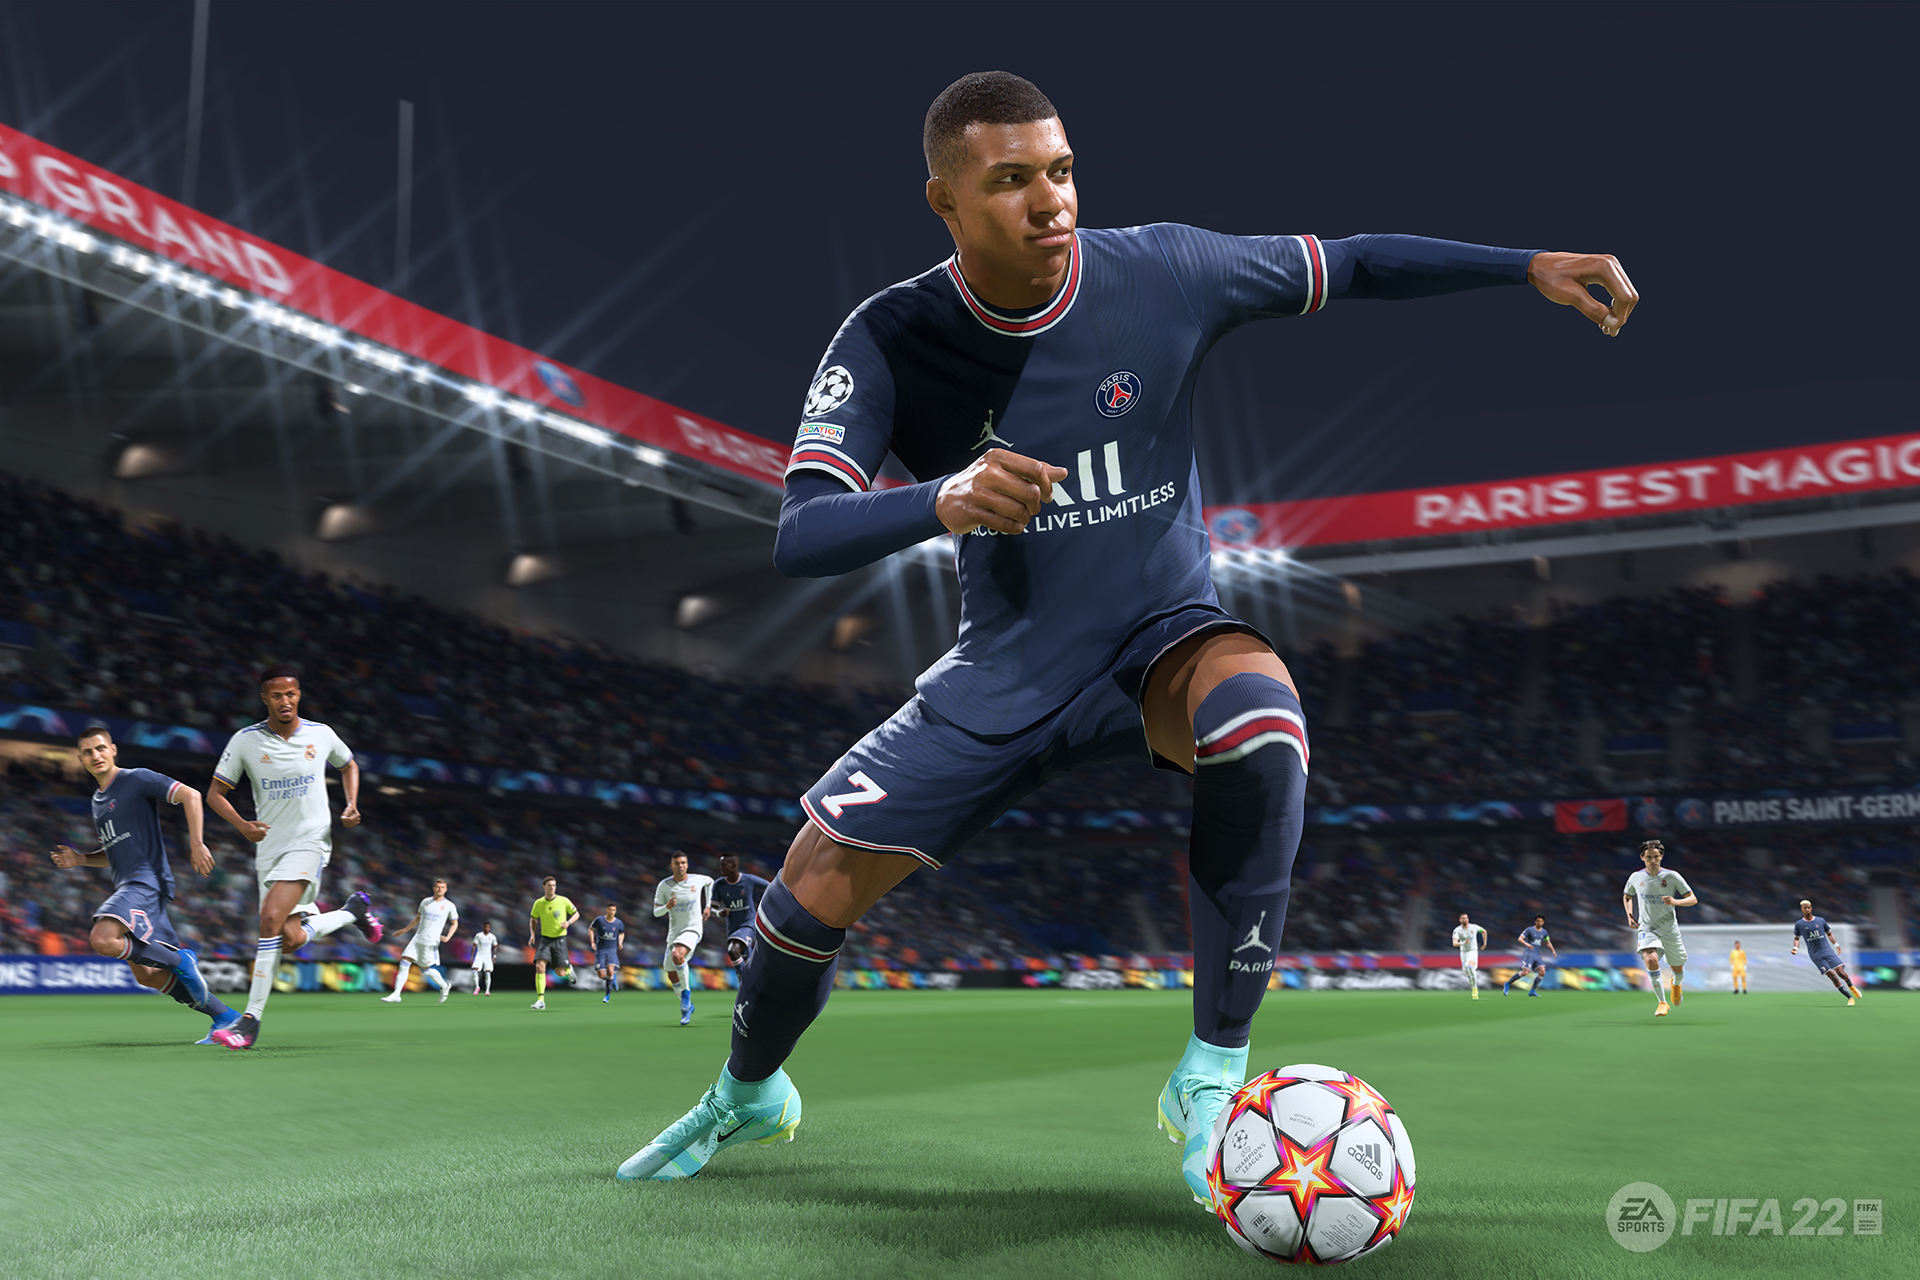 FIFA is just not thrilled with EA’s dominance of soccer games